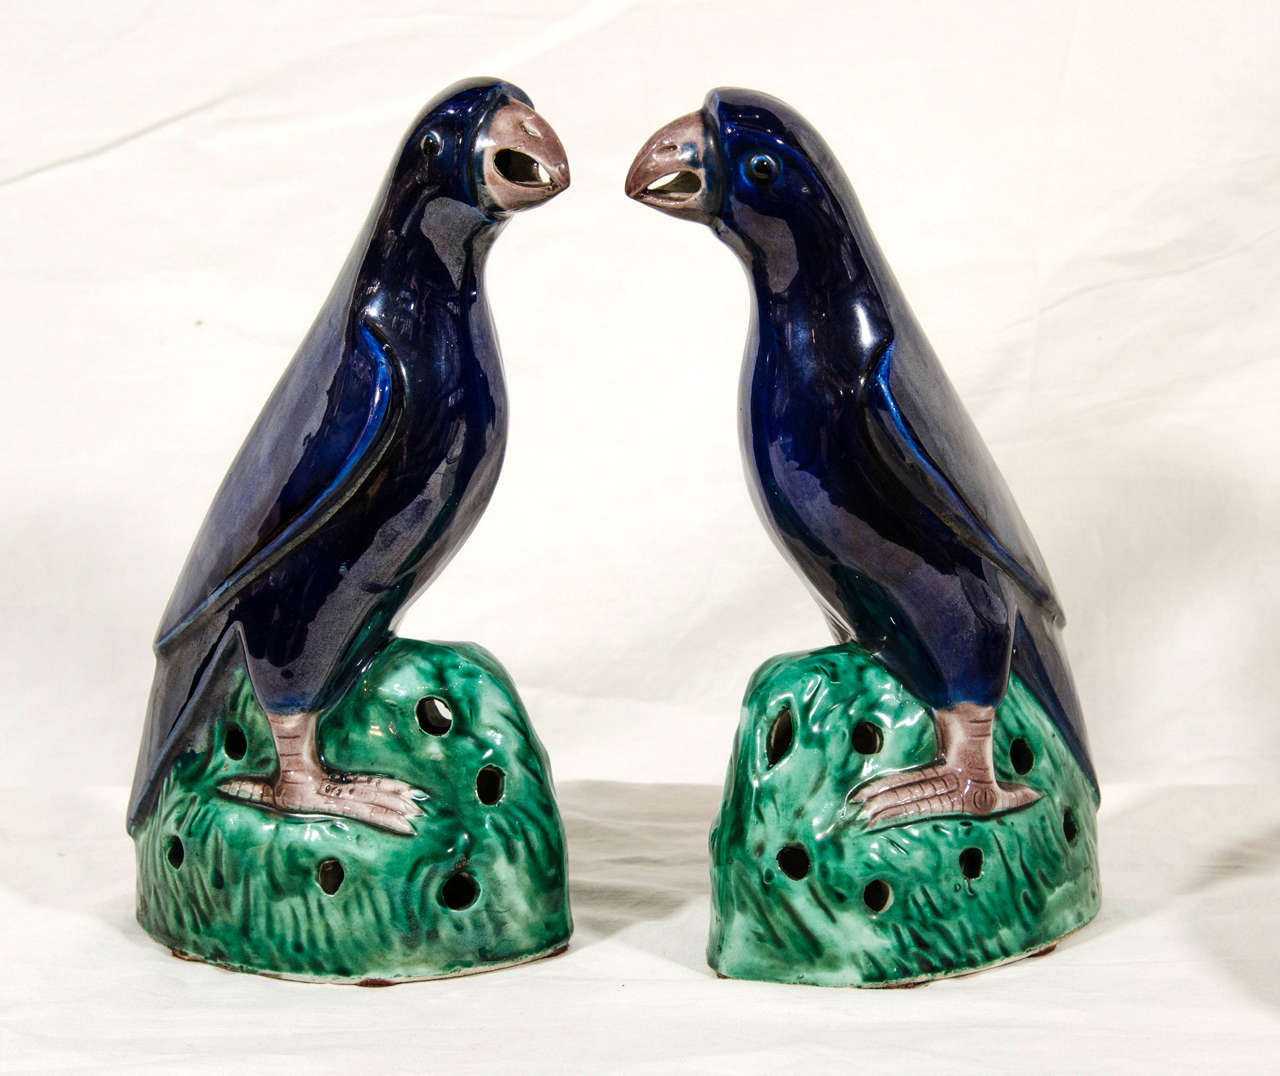 A pair of Famille Verte parrots each modeled in mirror image facing forward with heads slightly cocked. Perched on green pierced rockwork bases, their wings folded, their bodies under a lustrous cobalt glaze.